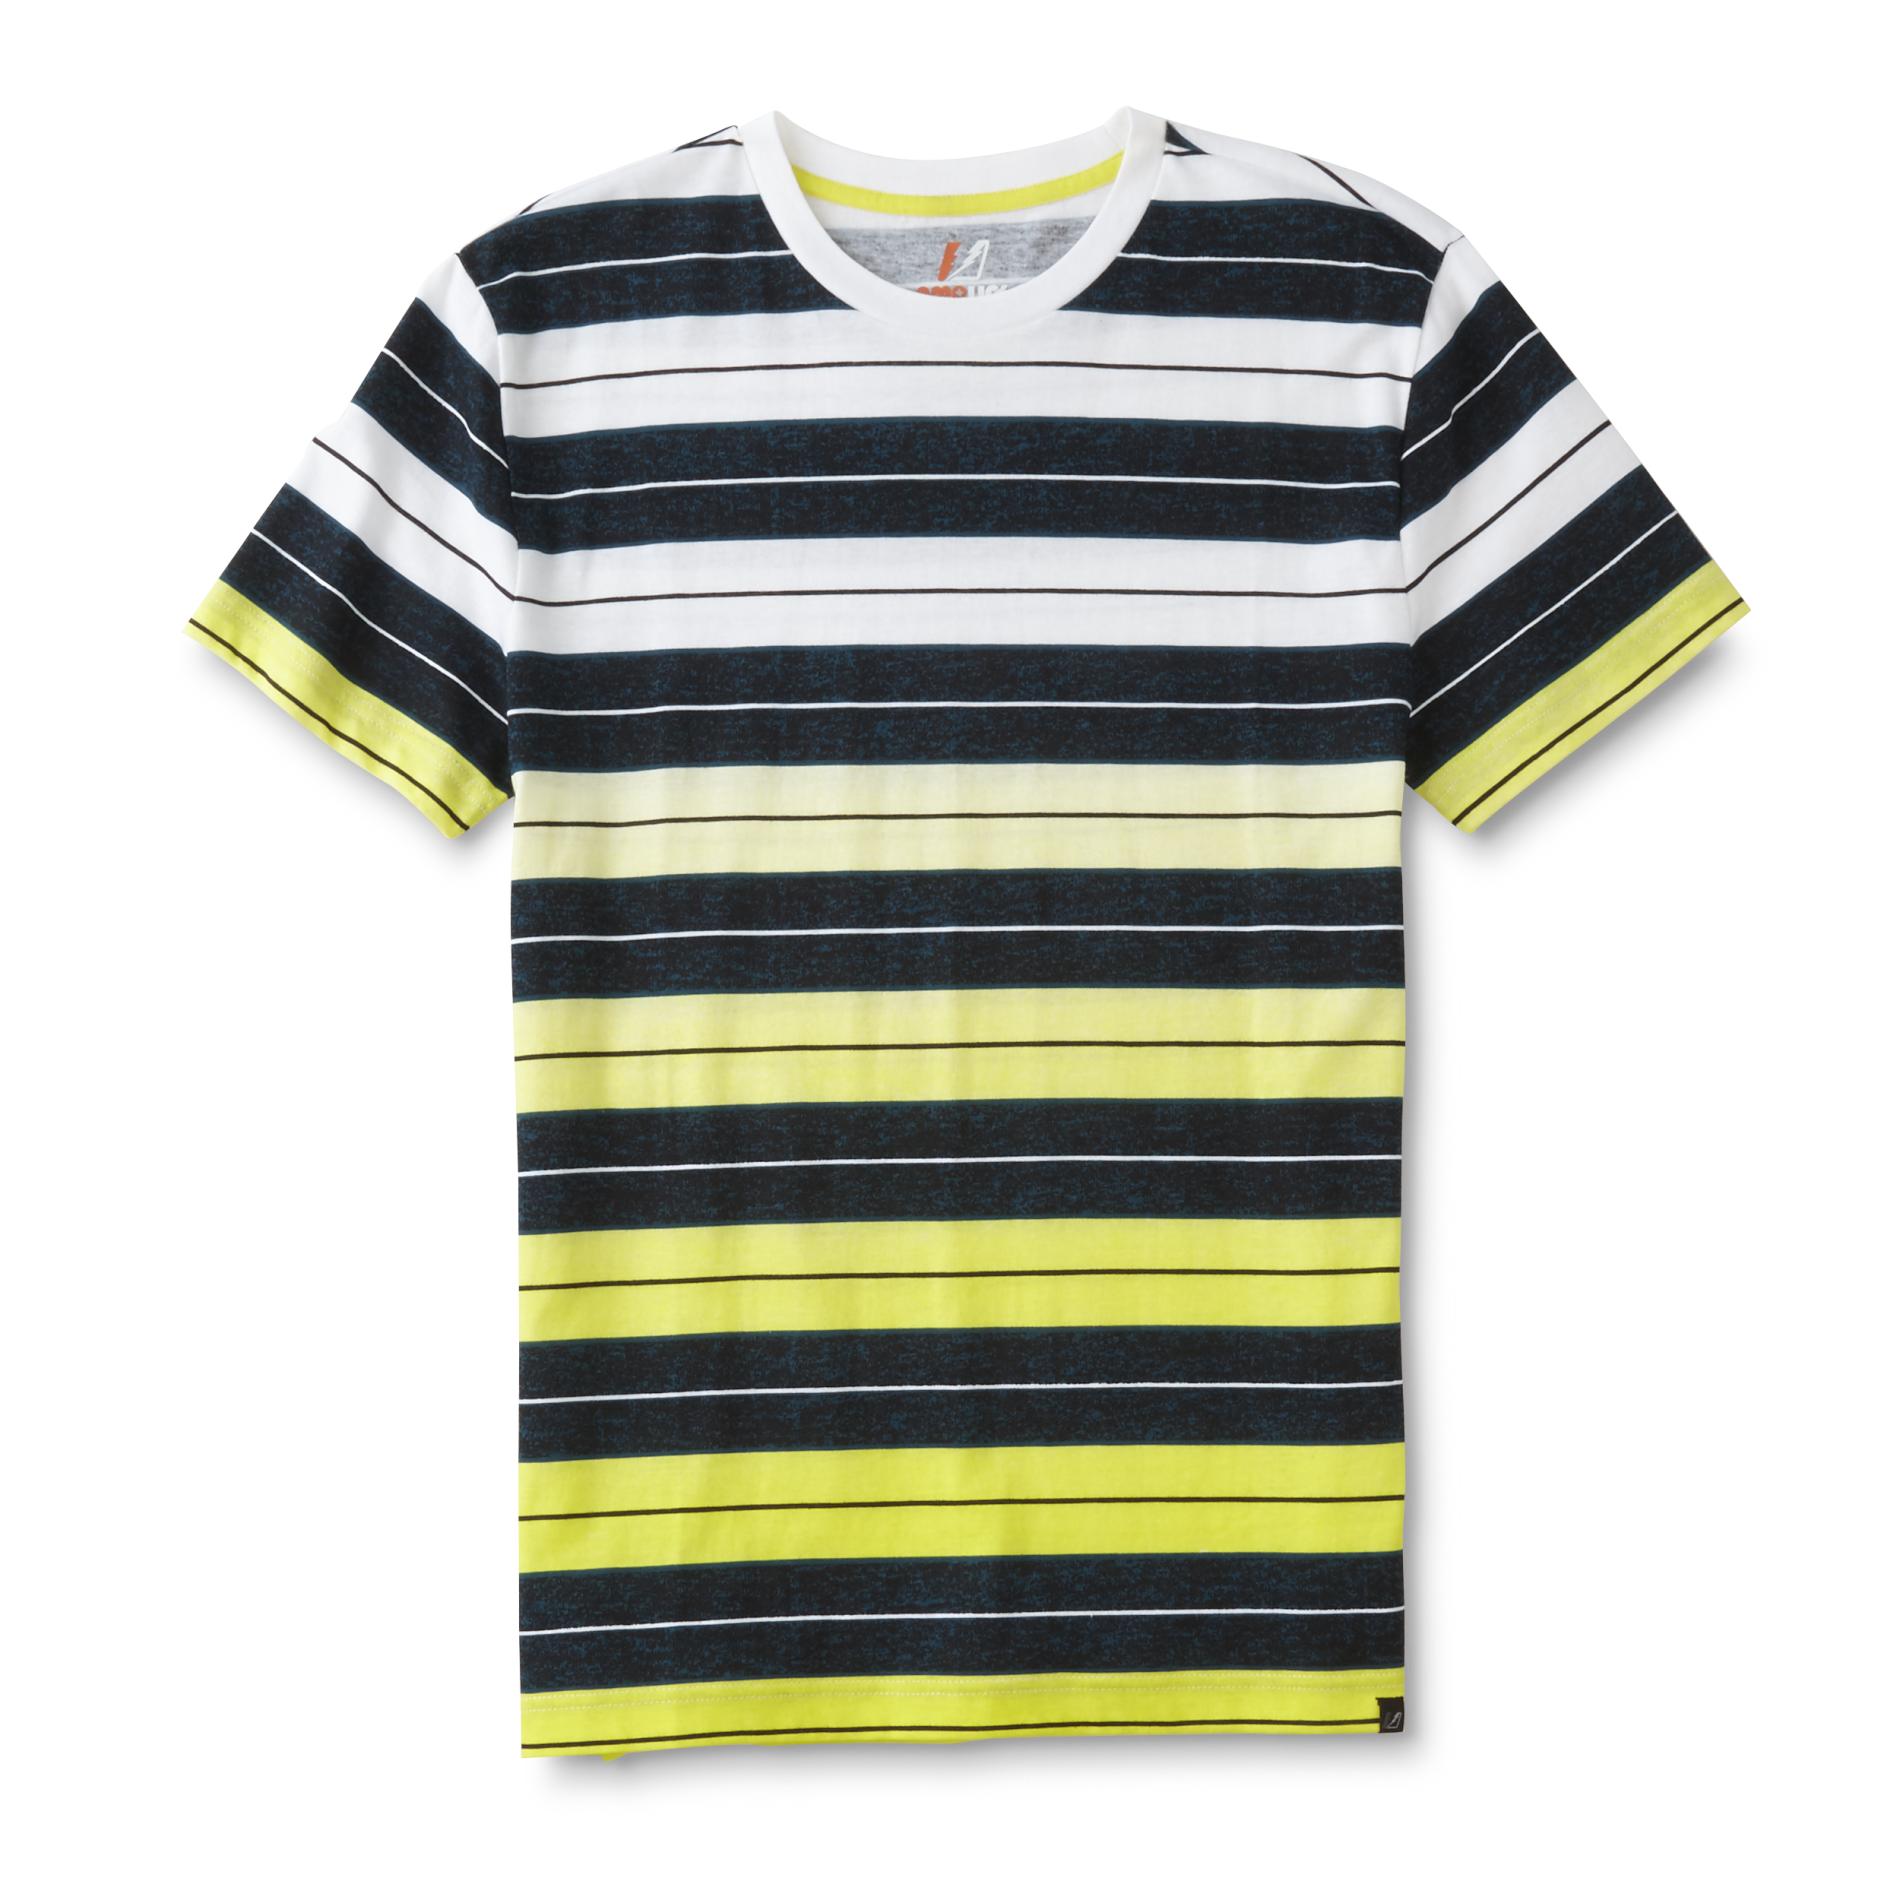 Amplify Young Men's T-Shirt - Colorblock & Striped